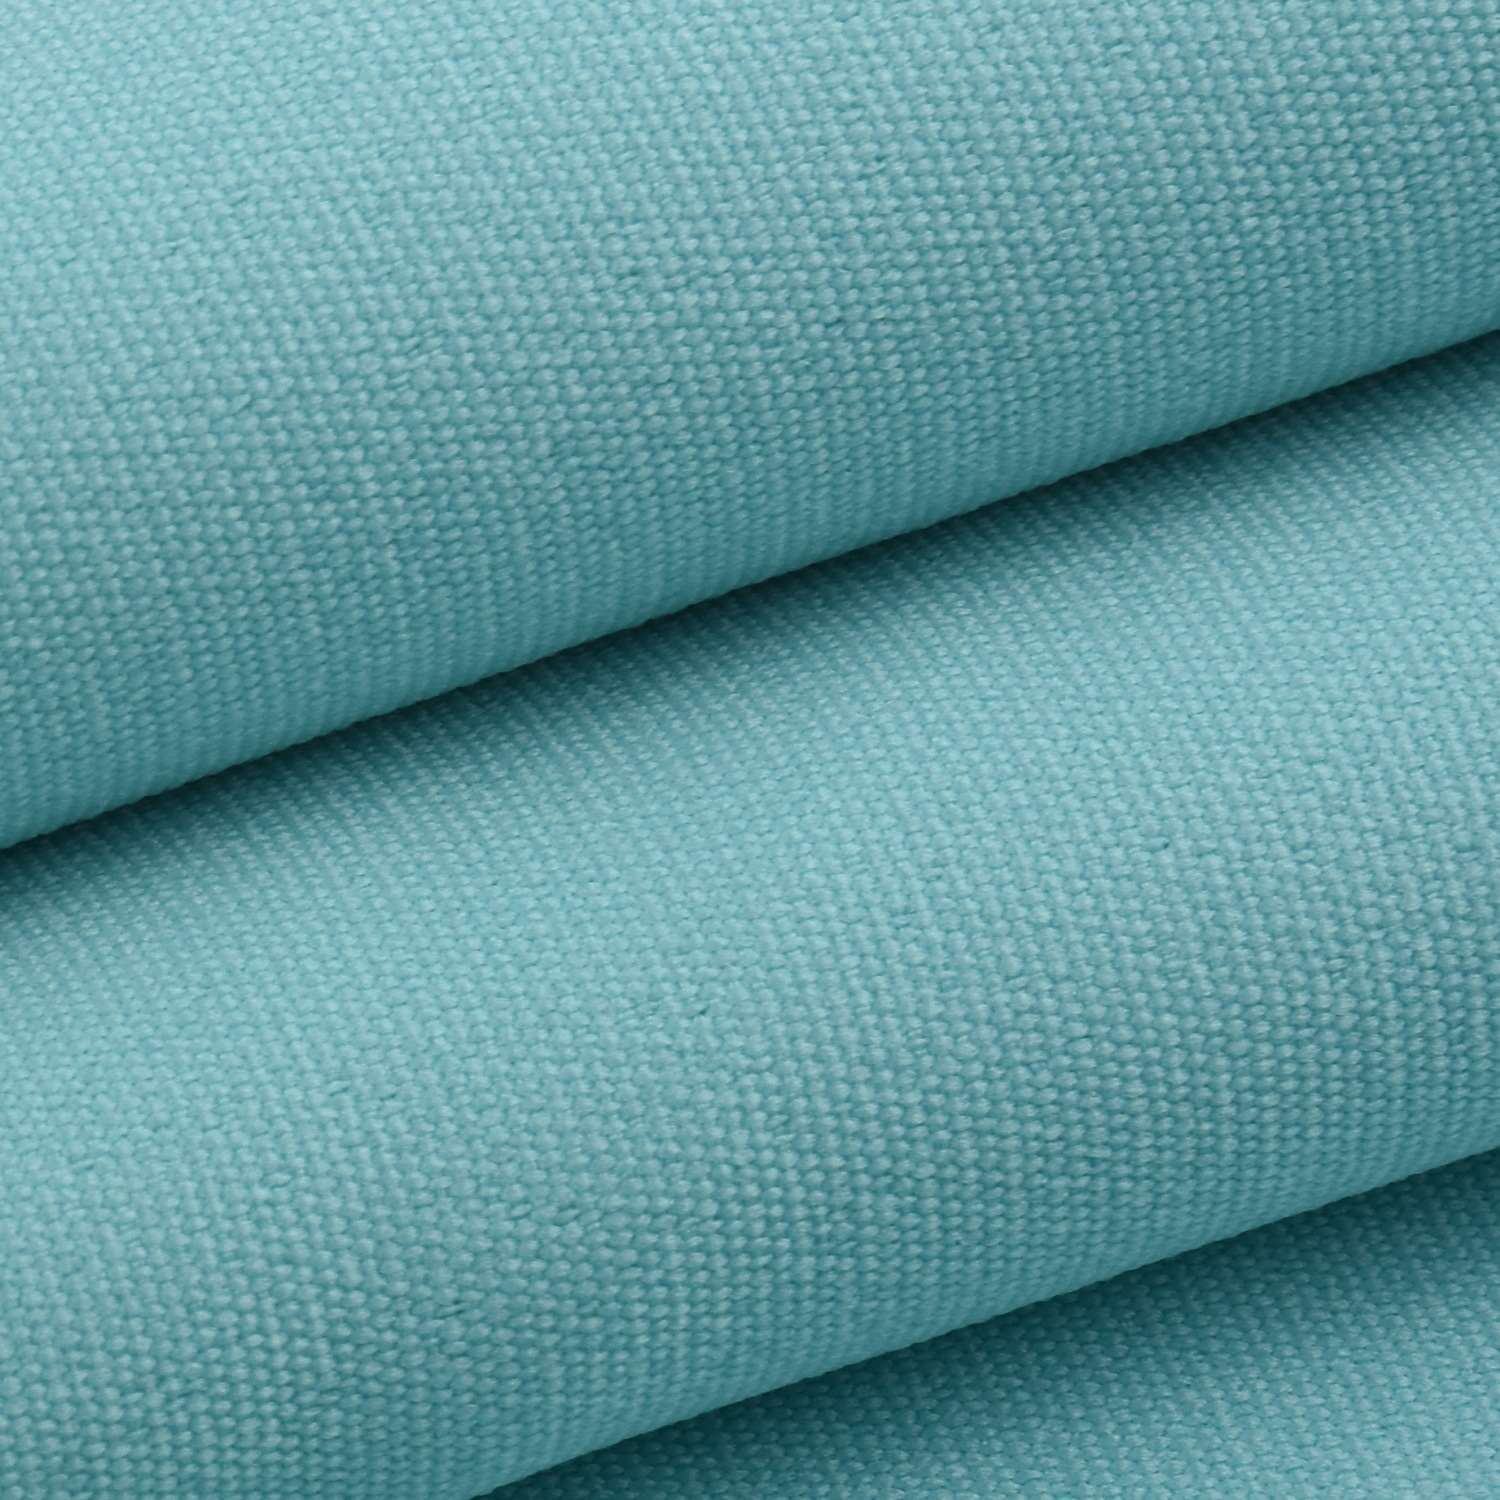 stretch polyester fabric for hiking pants